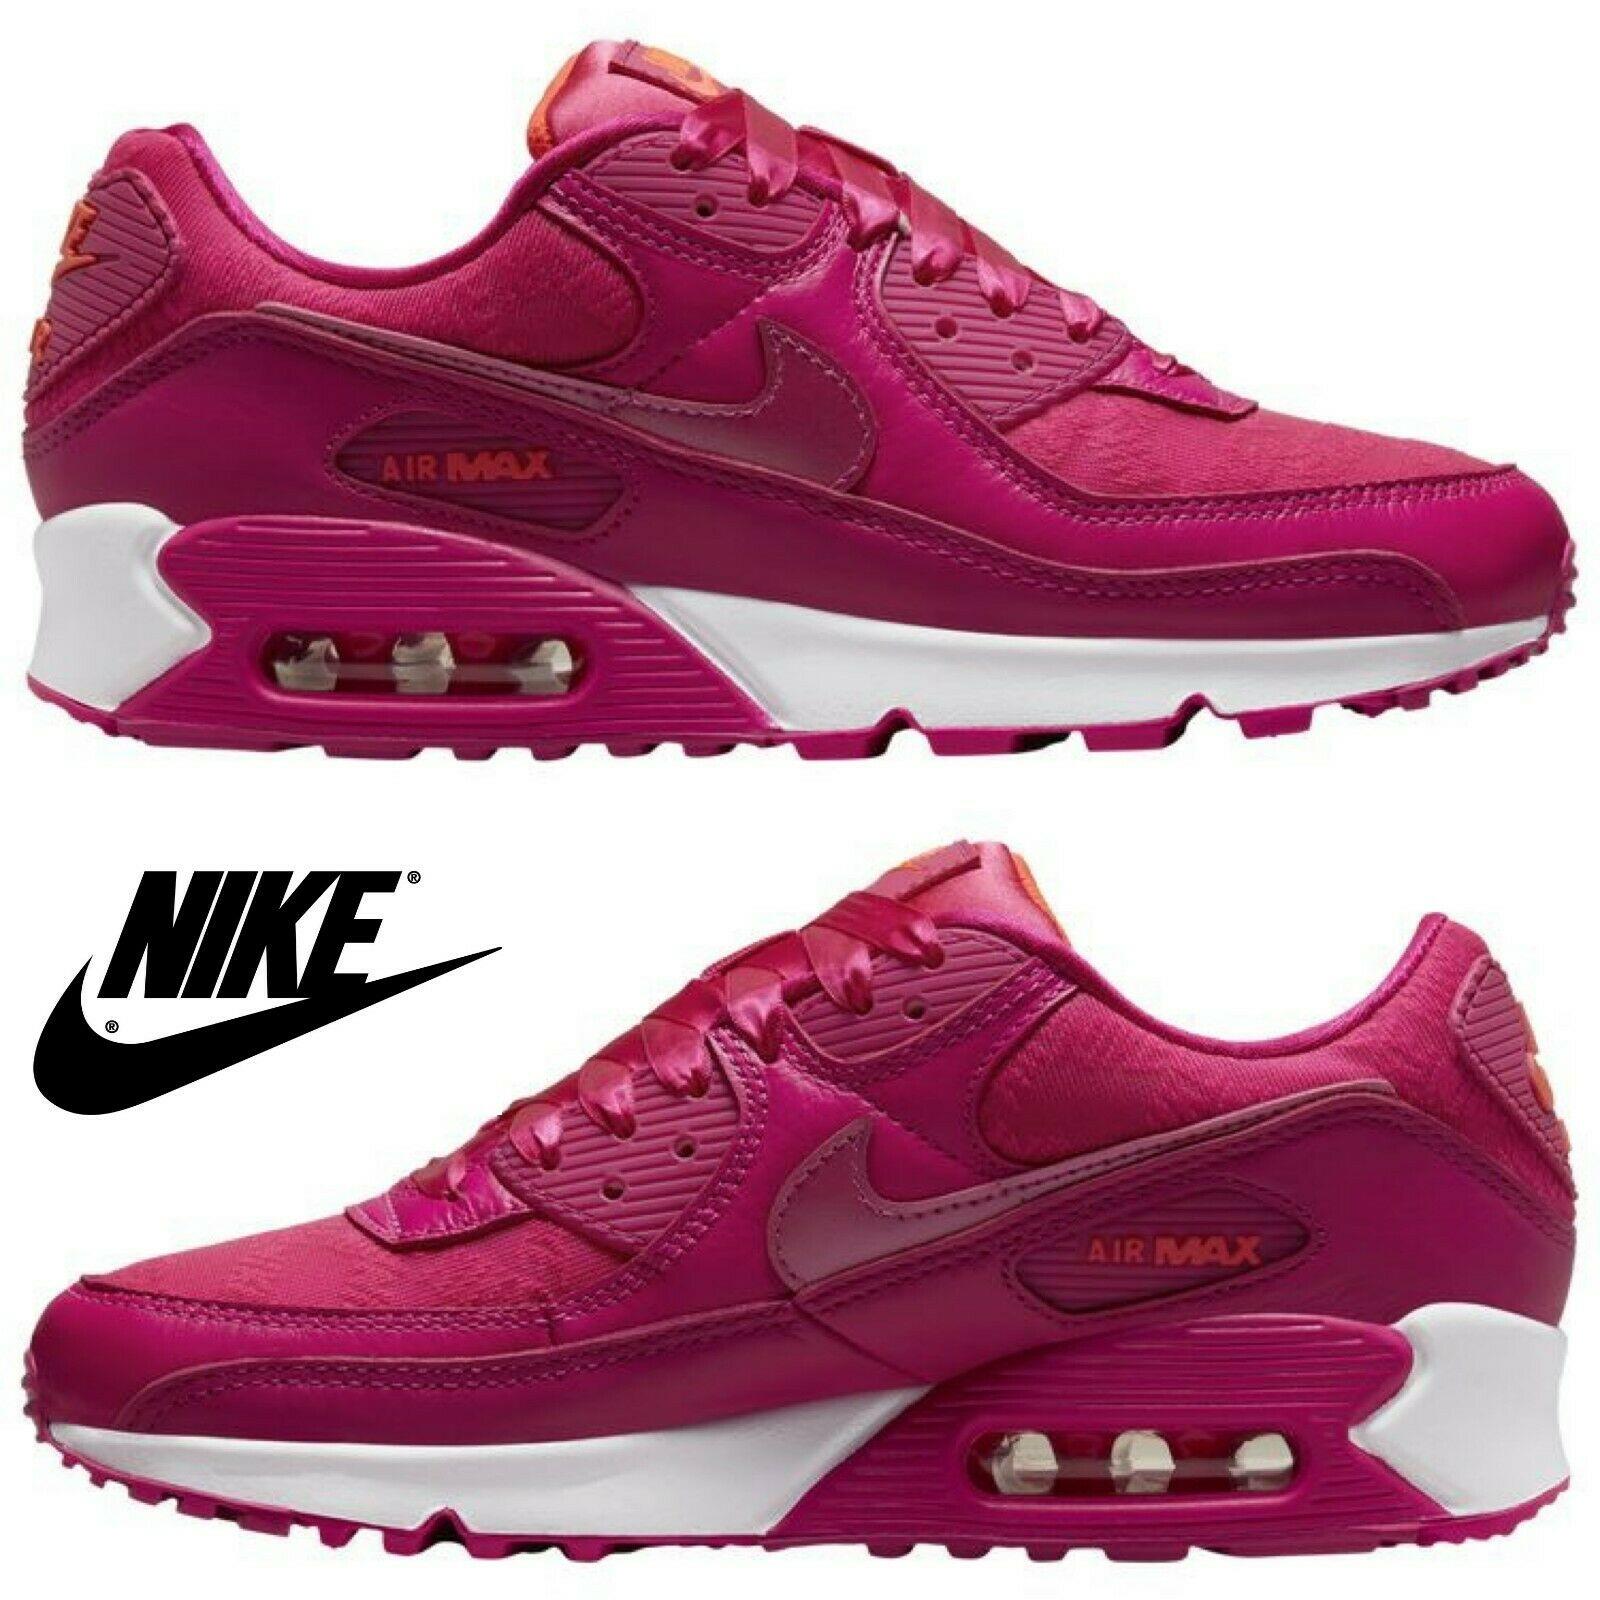 Nike Air Max 90 Women s Sneakers Casual Shoes Premium Running Sport Gym Pink - Pink , Pink/White Manufacturer